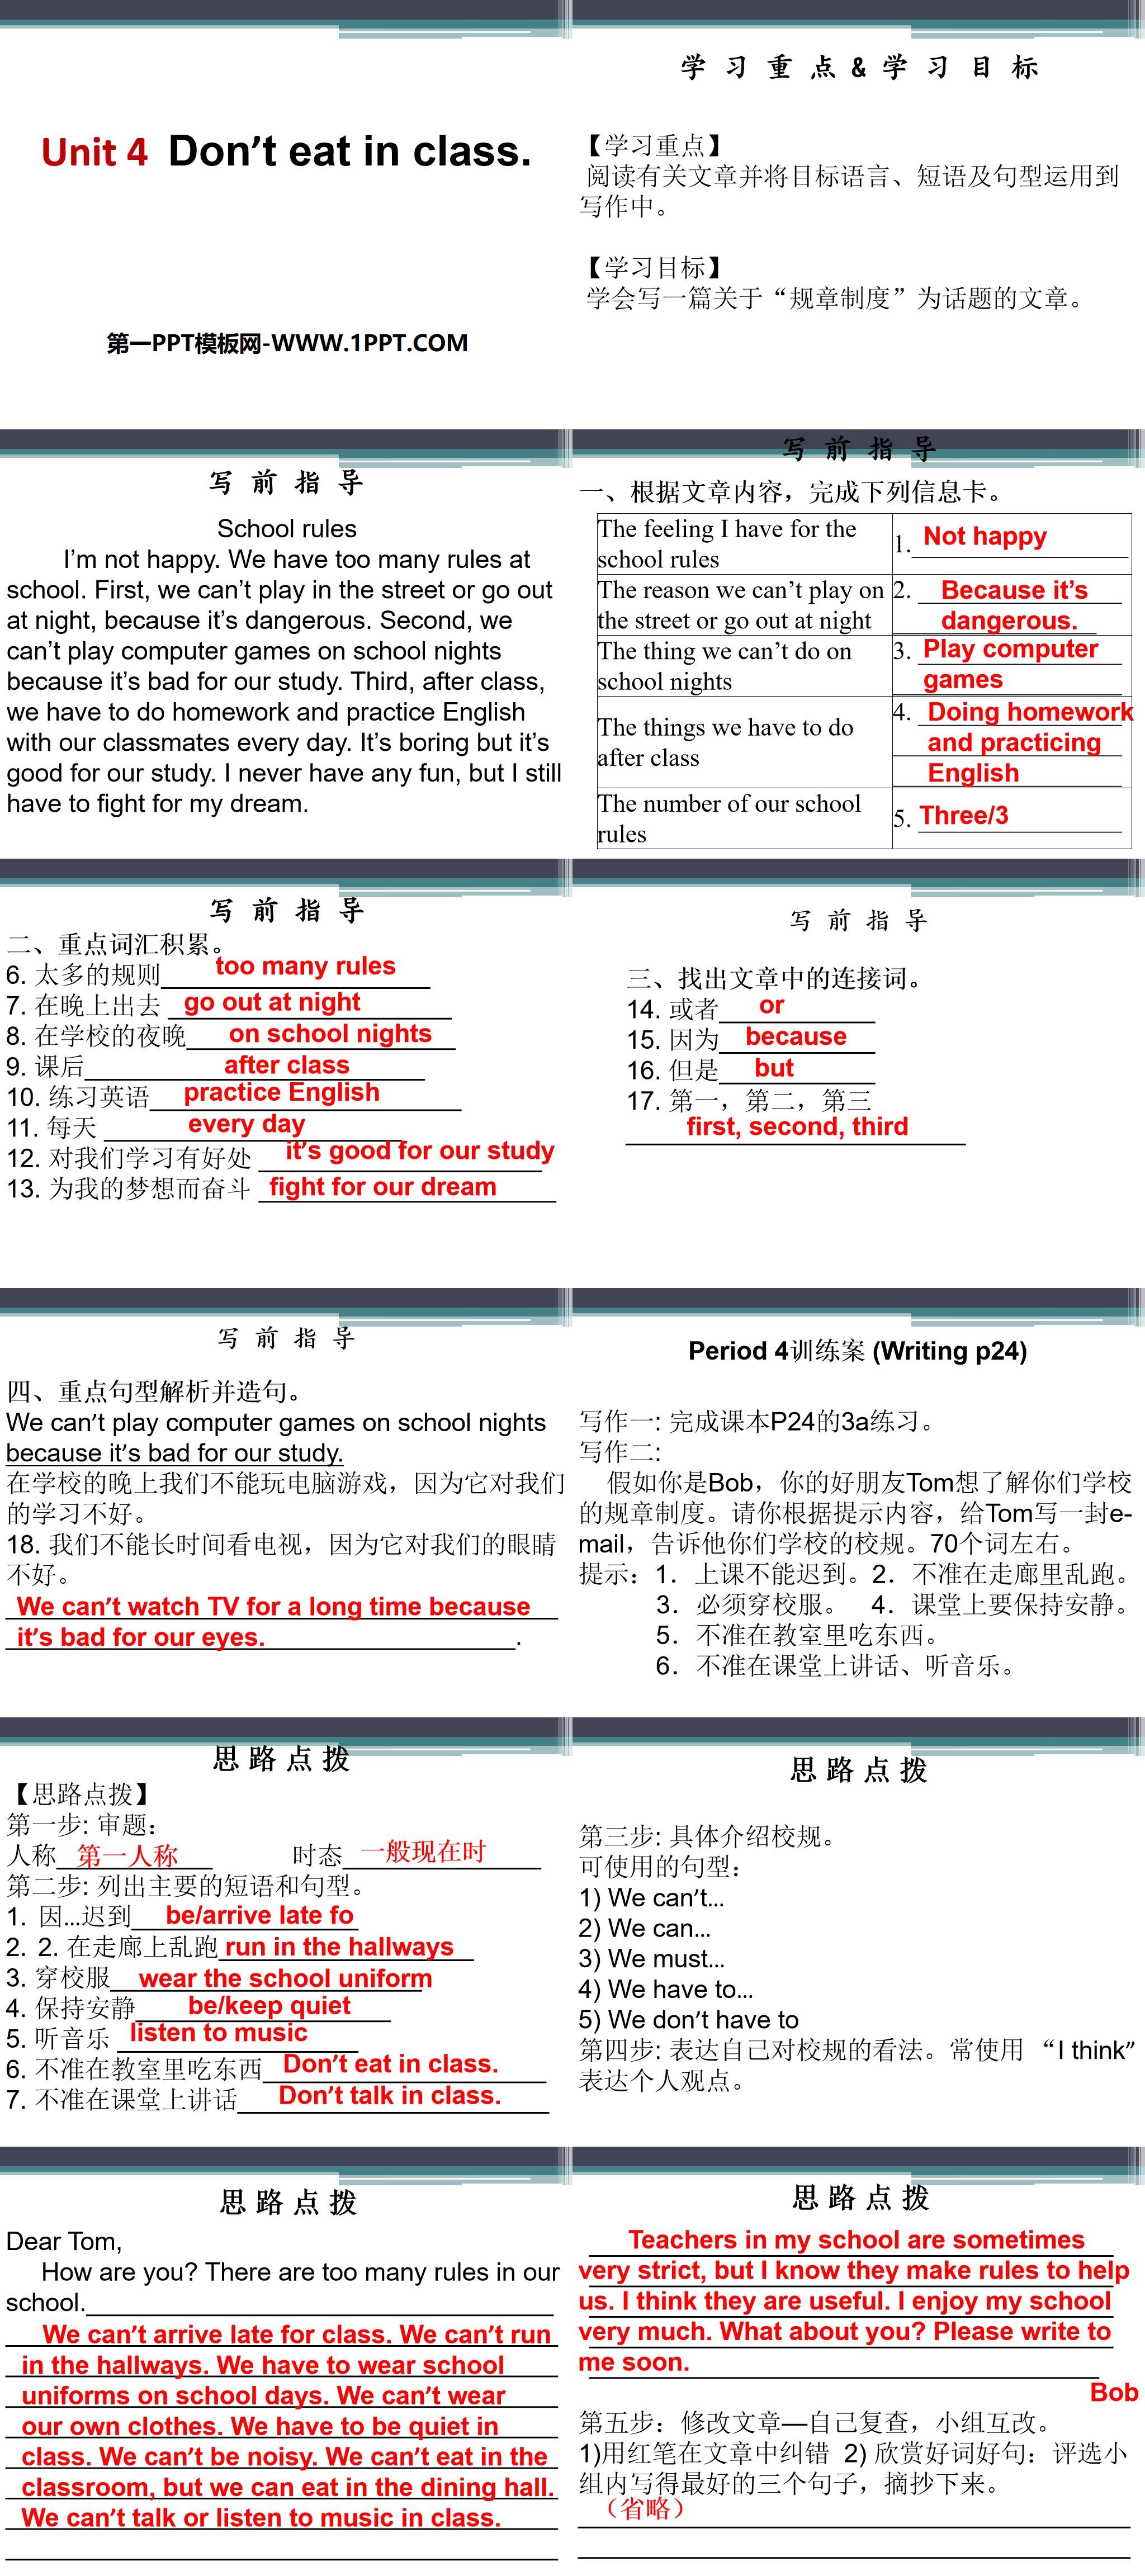 《Don't eat in class》PPT课件9
（2）